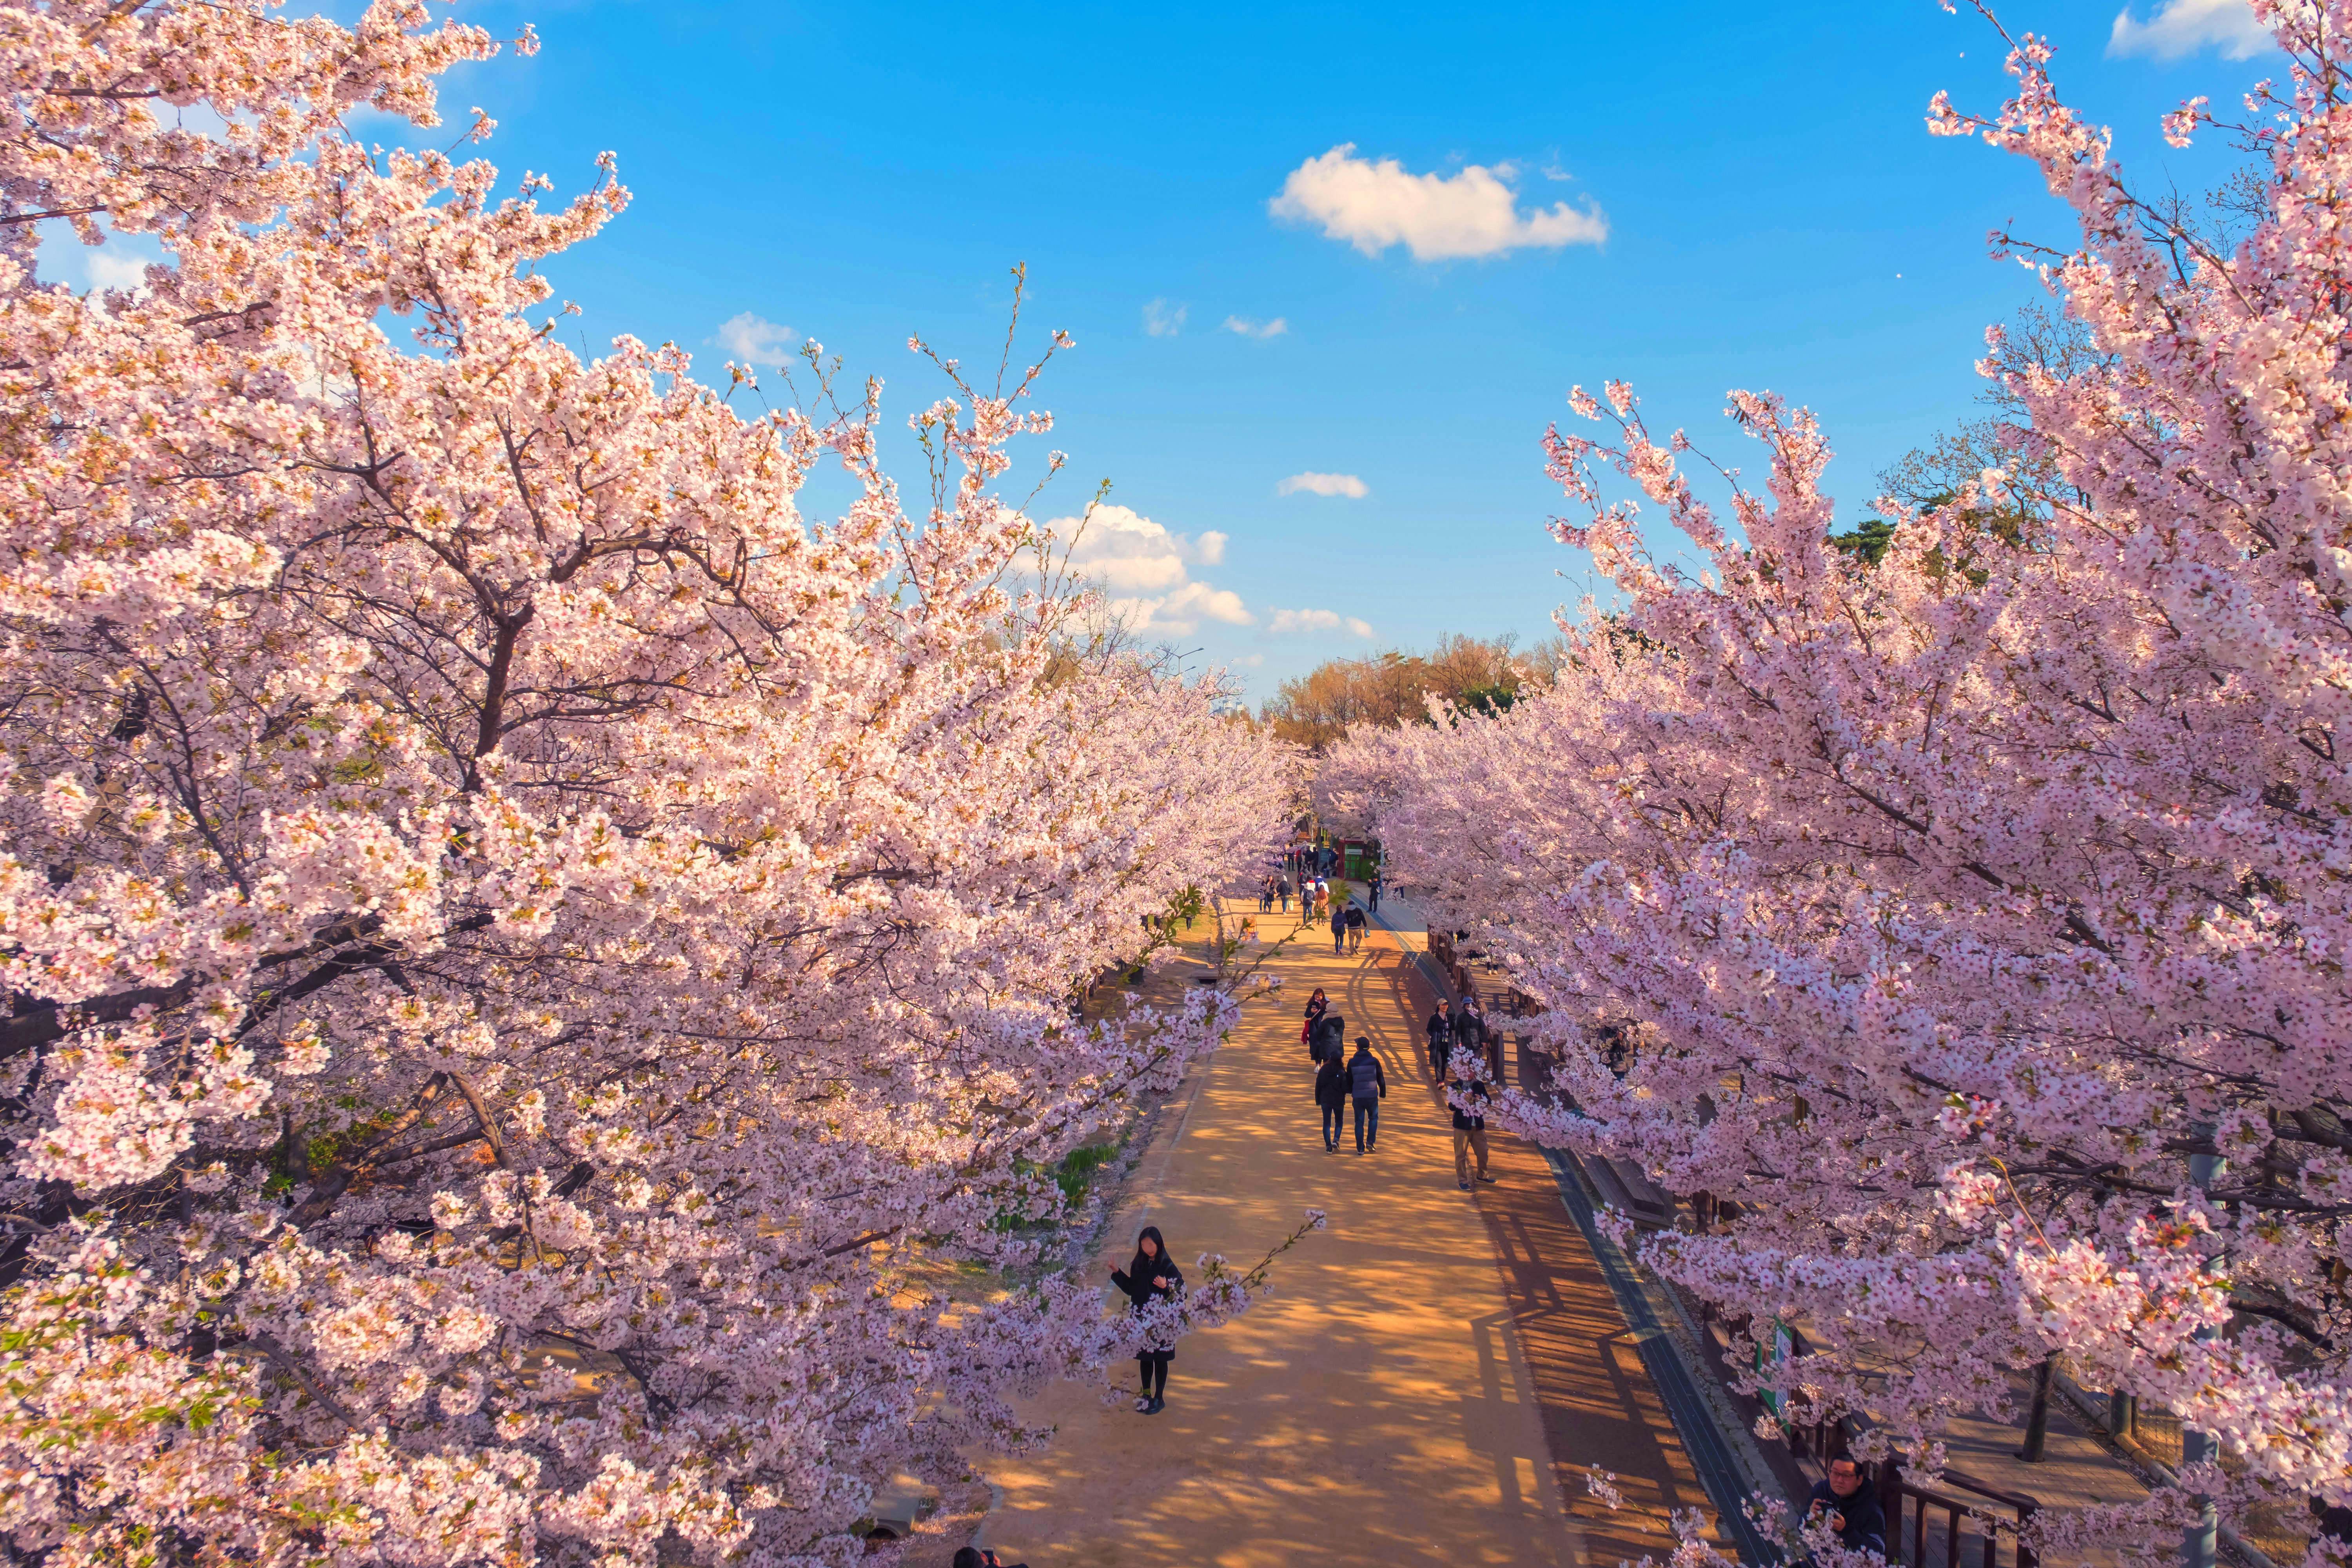 Things to know before traveling to South Korea - Lonely Planet